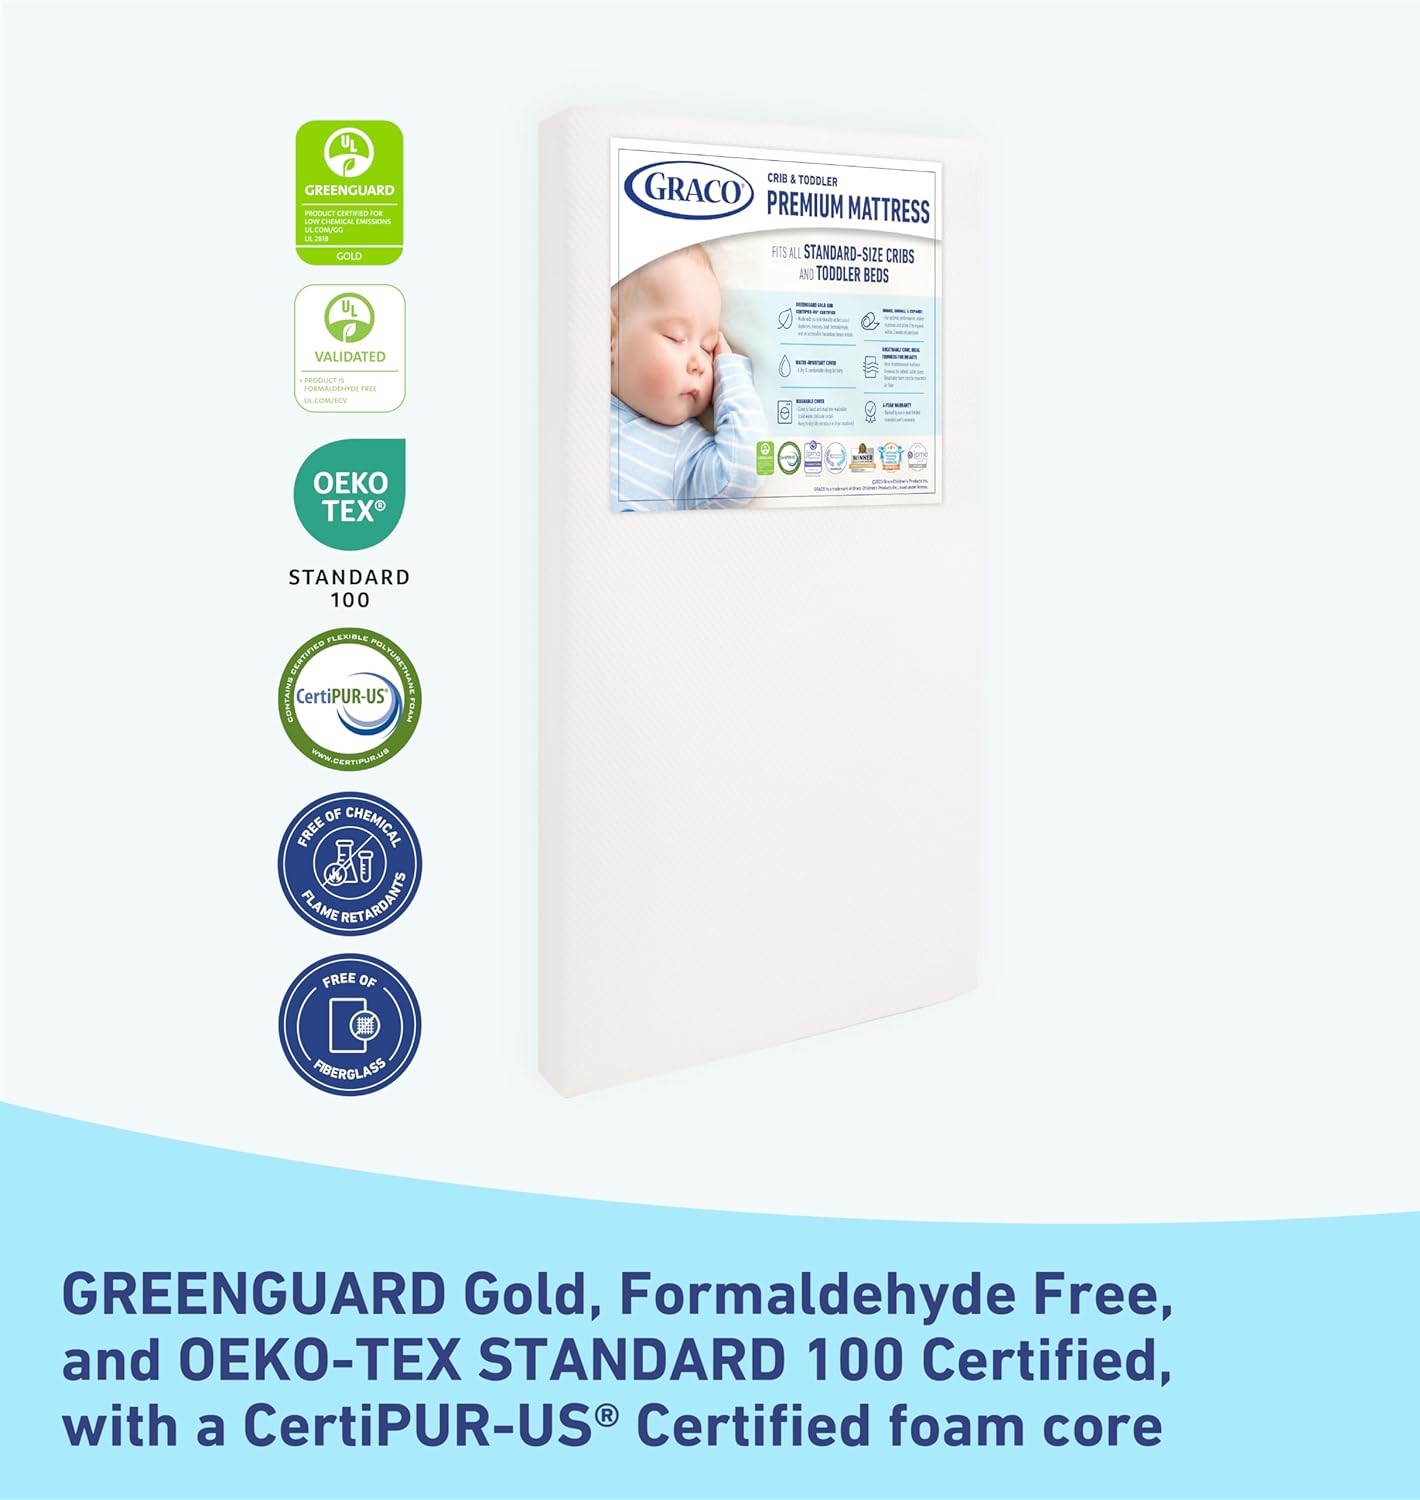 Baby - Graco Premium Crib & Toddler Mattress - GREENGUARD & CertiPUR-US Certified, Machine Washable Cover, Waterproof Sleep Surface, Fits Crib & Toddler Bed